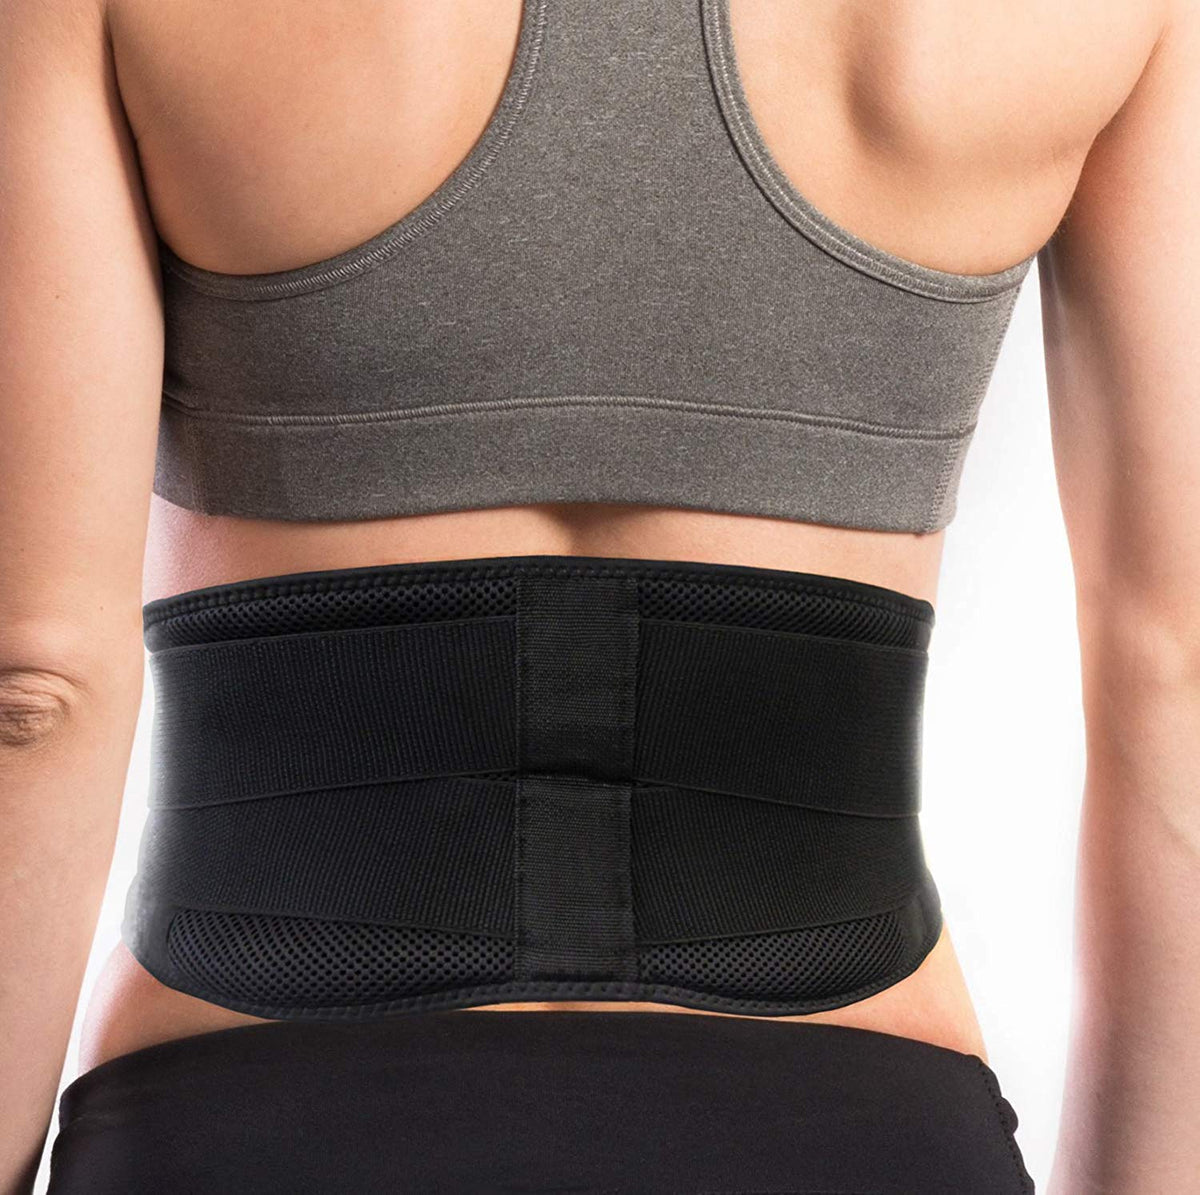 Breathable Mesh Back Support Brace for Men & Women, Abdominal Support Belt  for Back Pain Relief, Magnetic Therapy Belt, Waist Trimmer